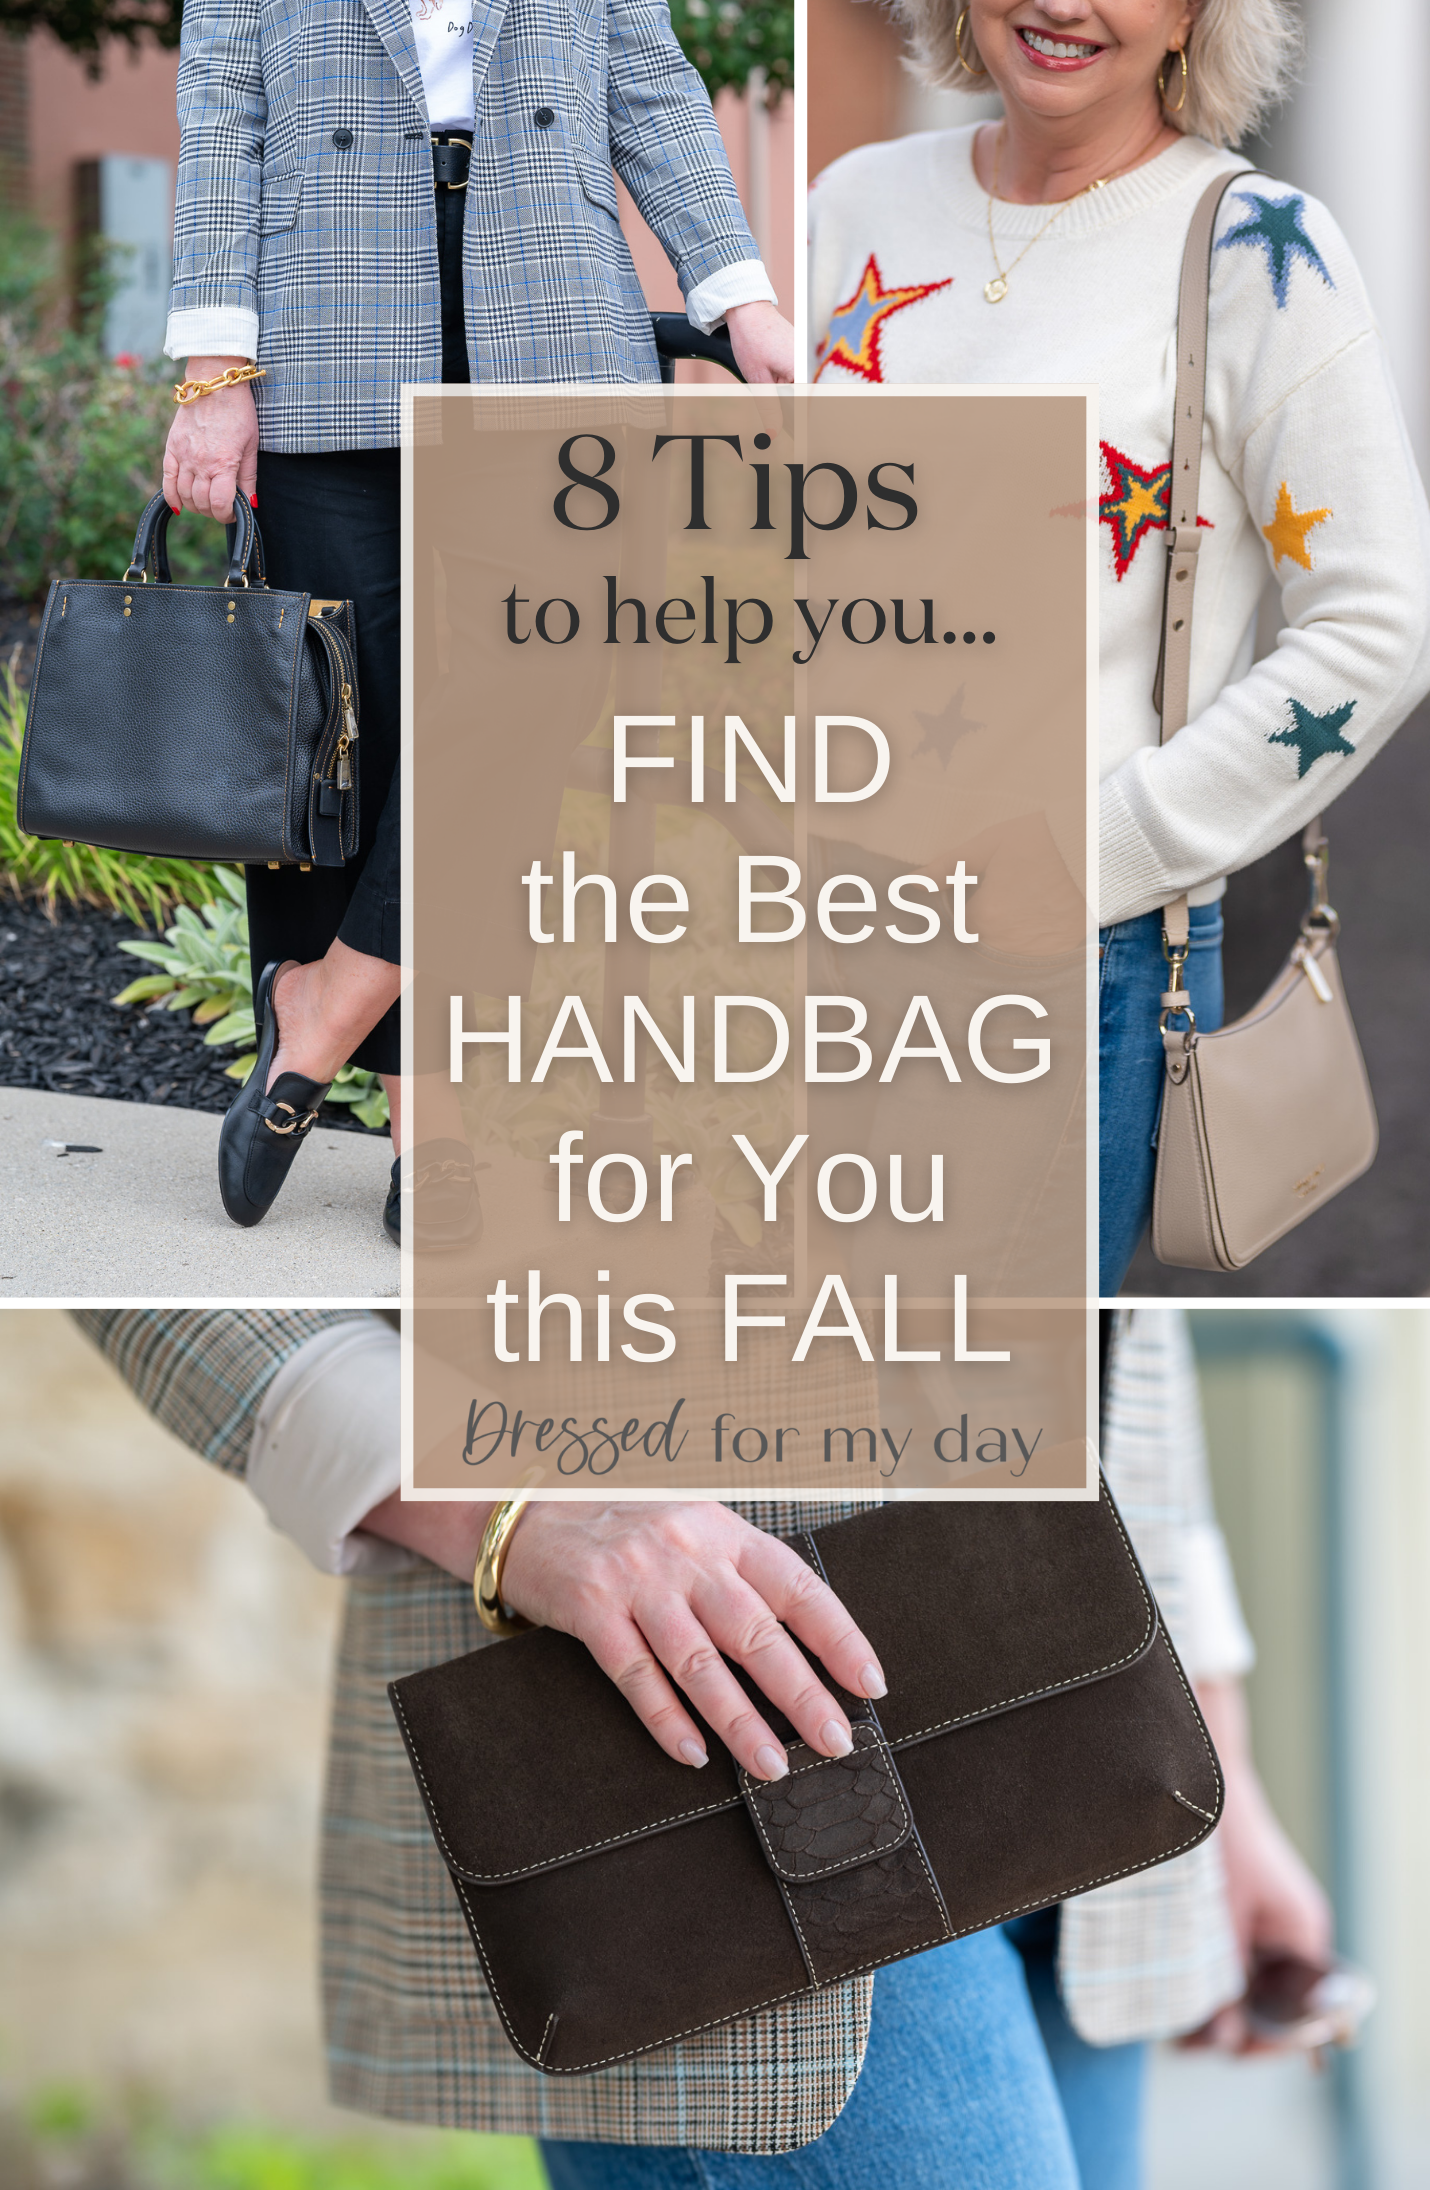 8 Tips to Help You Find the Best Handbag for You this Fall